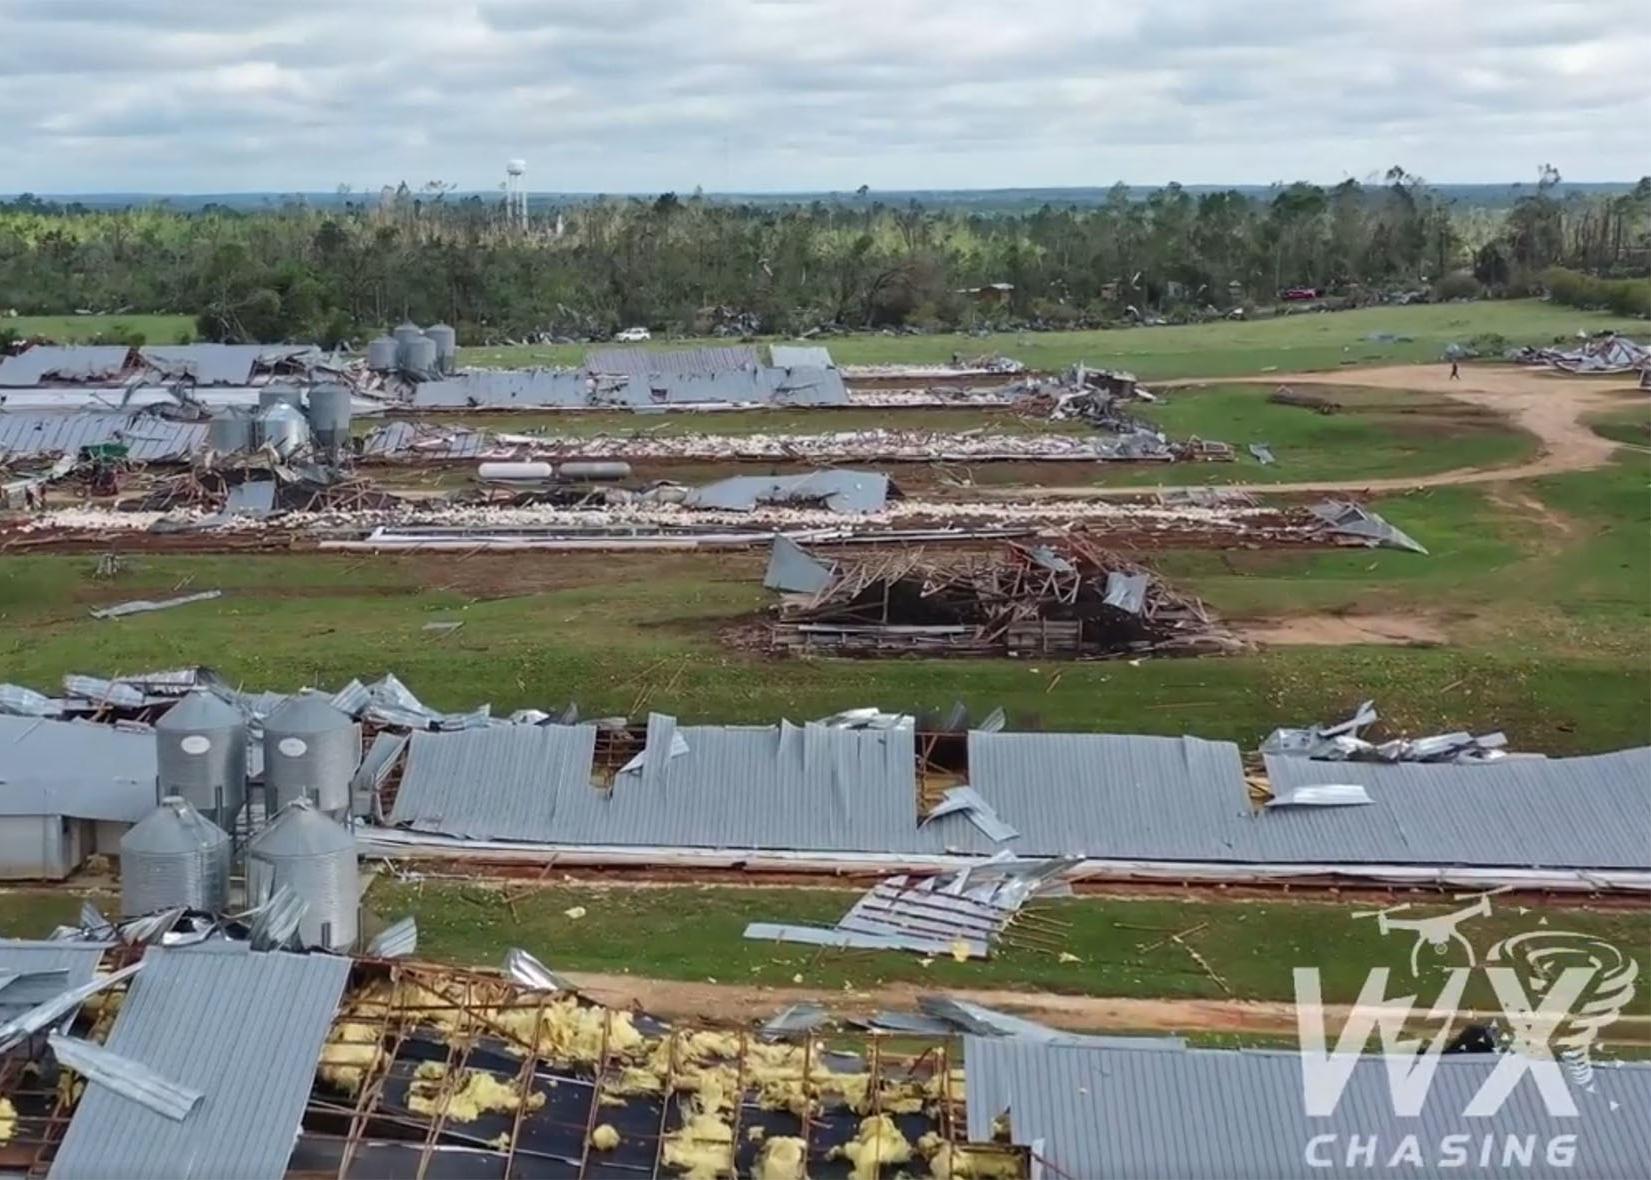 Metal roofs of poultry houses lie on the ground in rows amid twisted metal and debris.